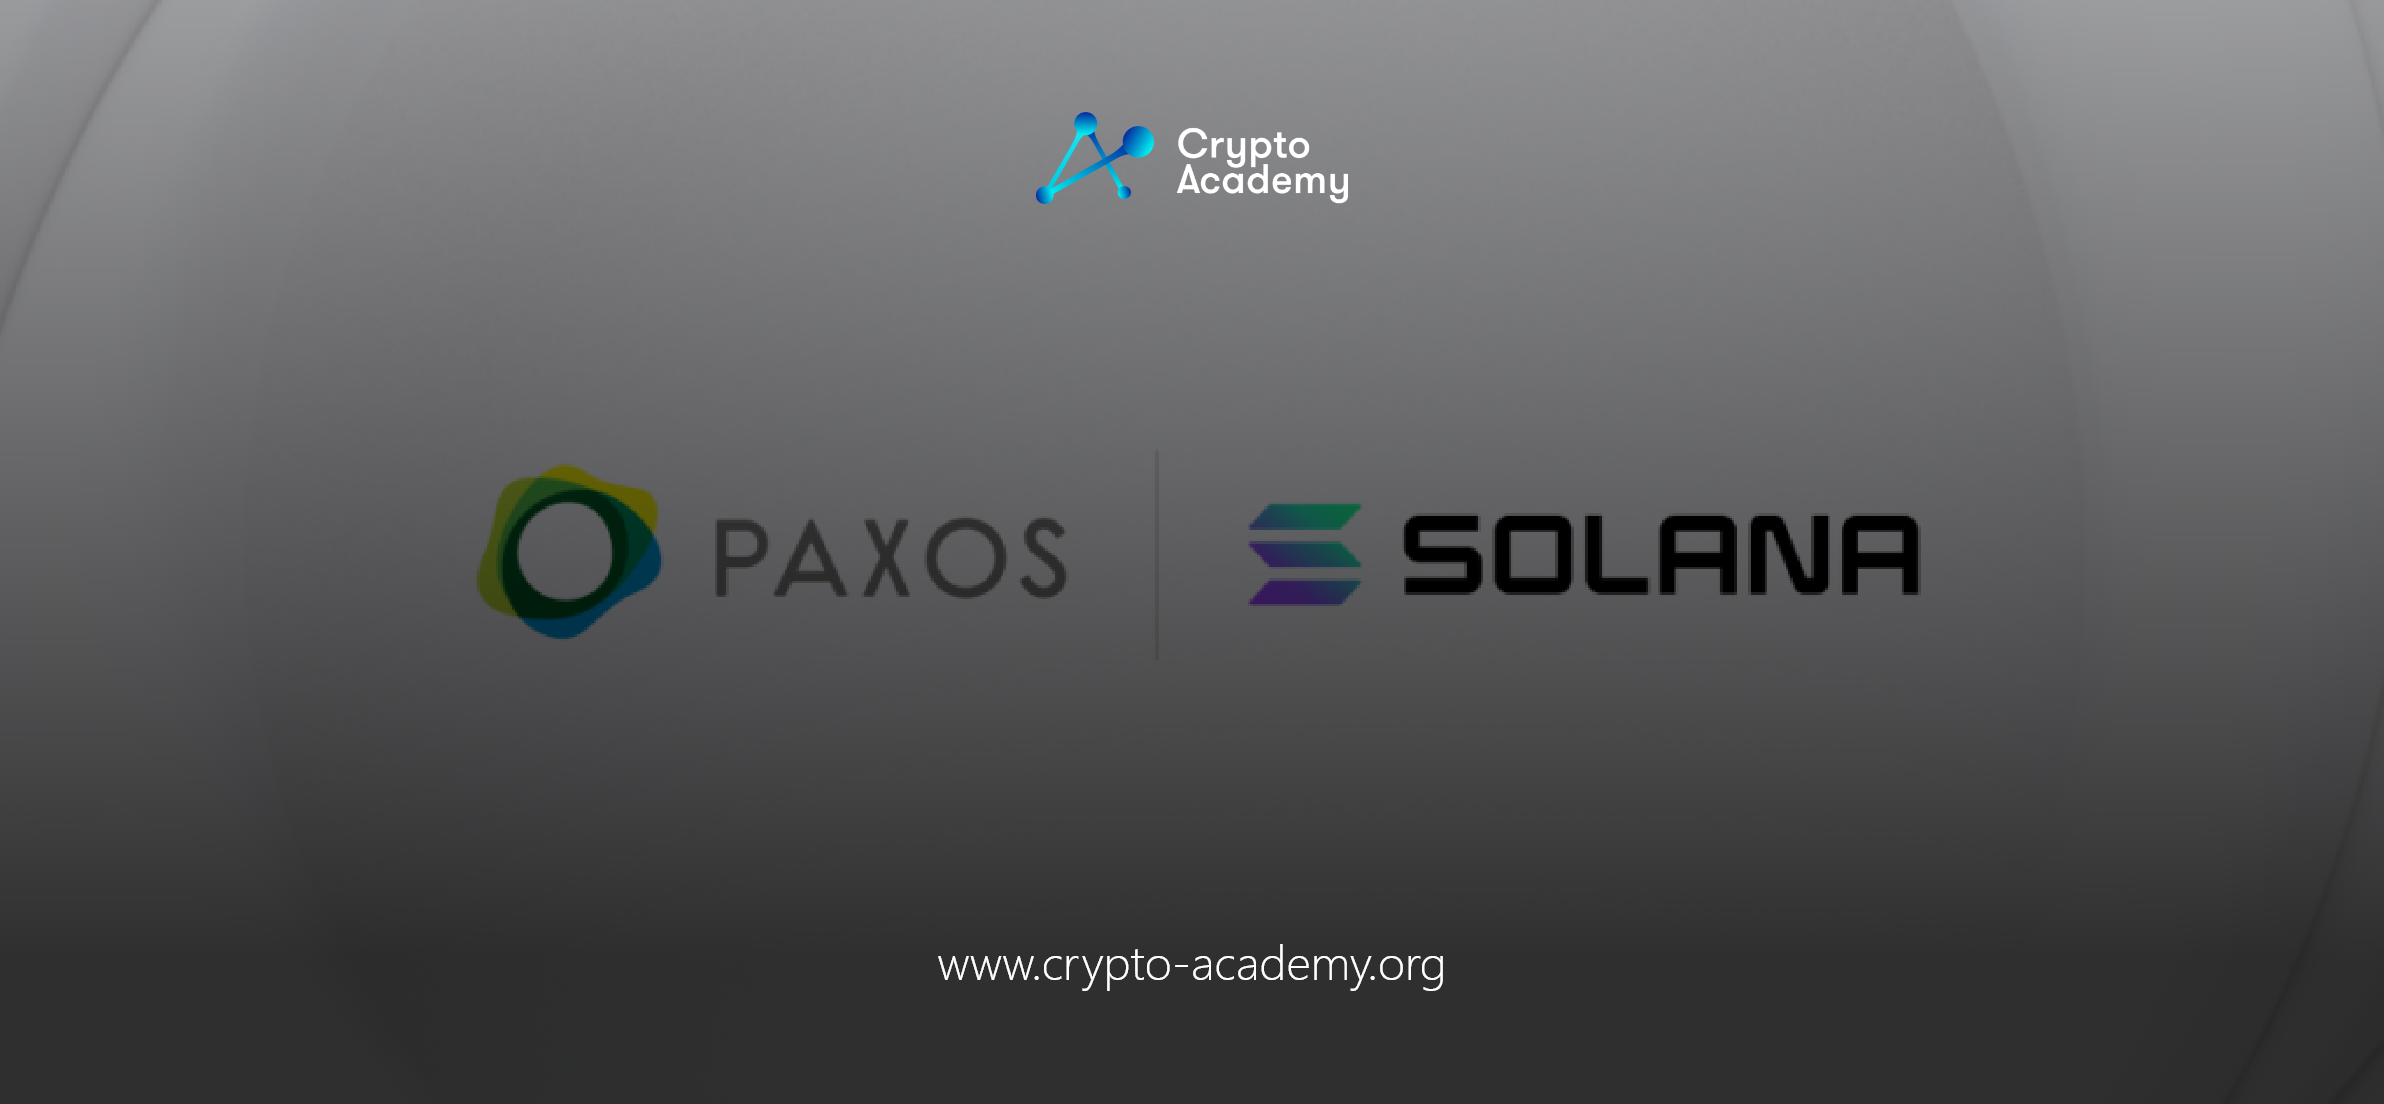 Paxos Secures Approval to Launch on Solana Blockchain